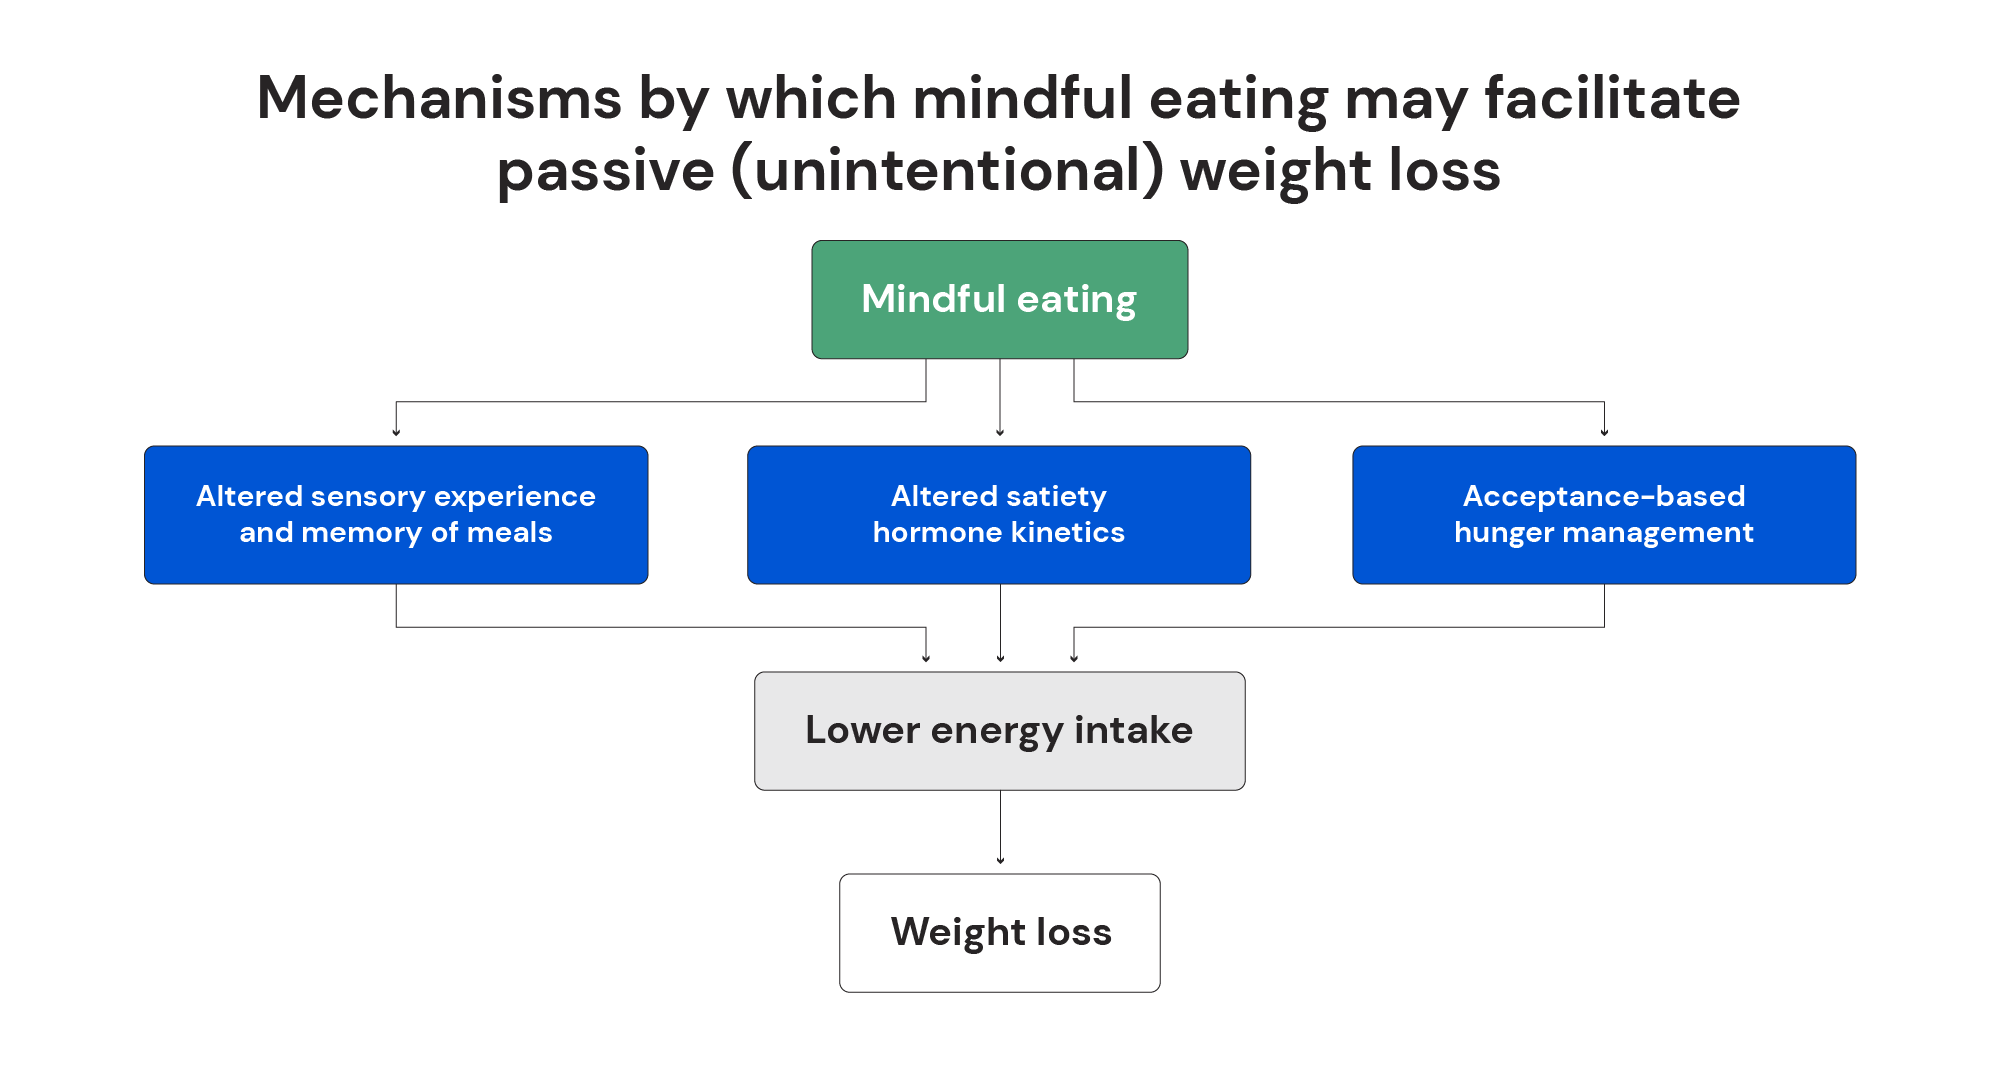 Mechanisms by which mindful eating may facilitate passive (unintentional) weight loss